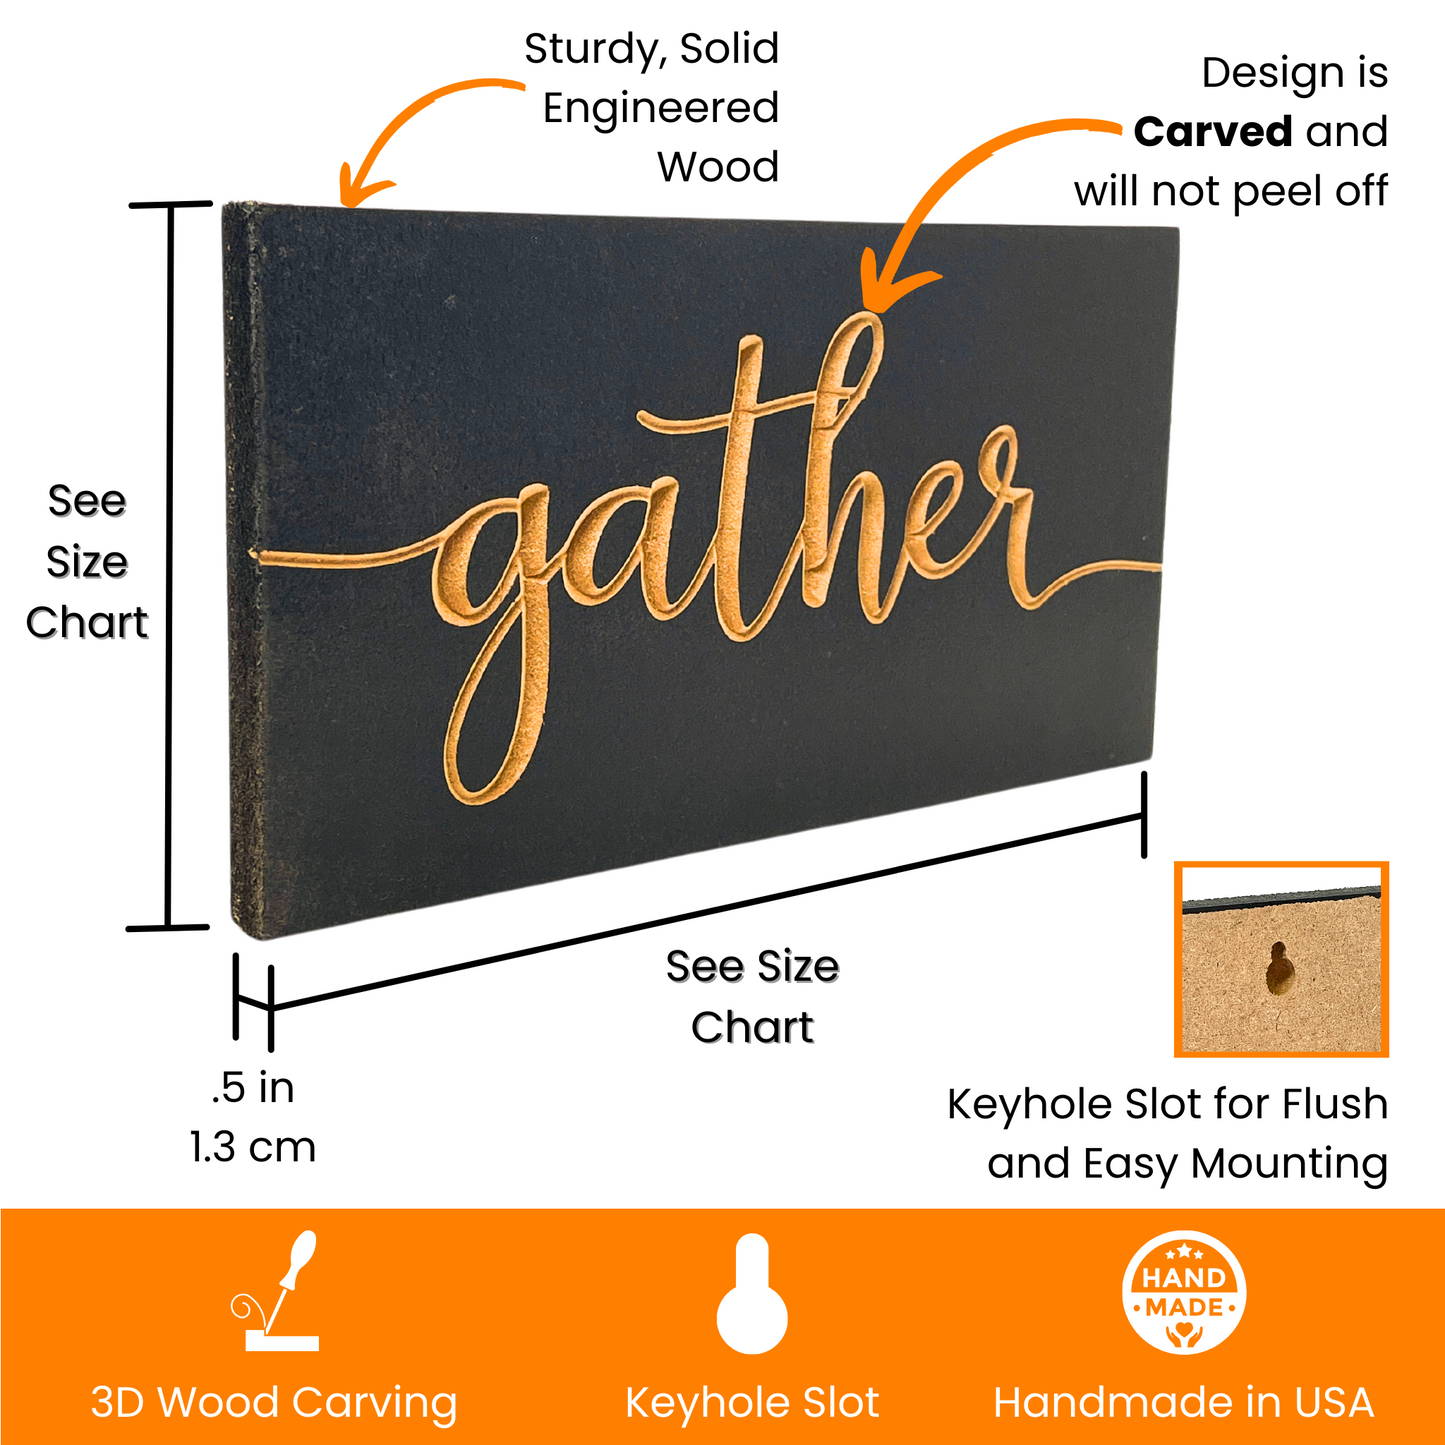 Gather wall decor product details